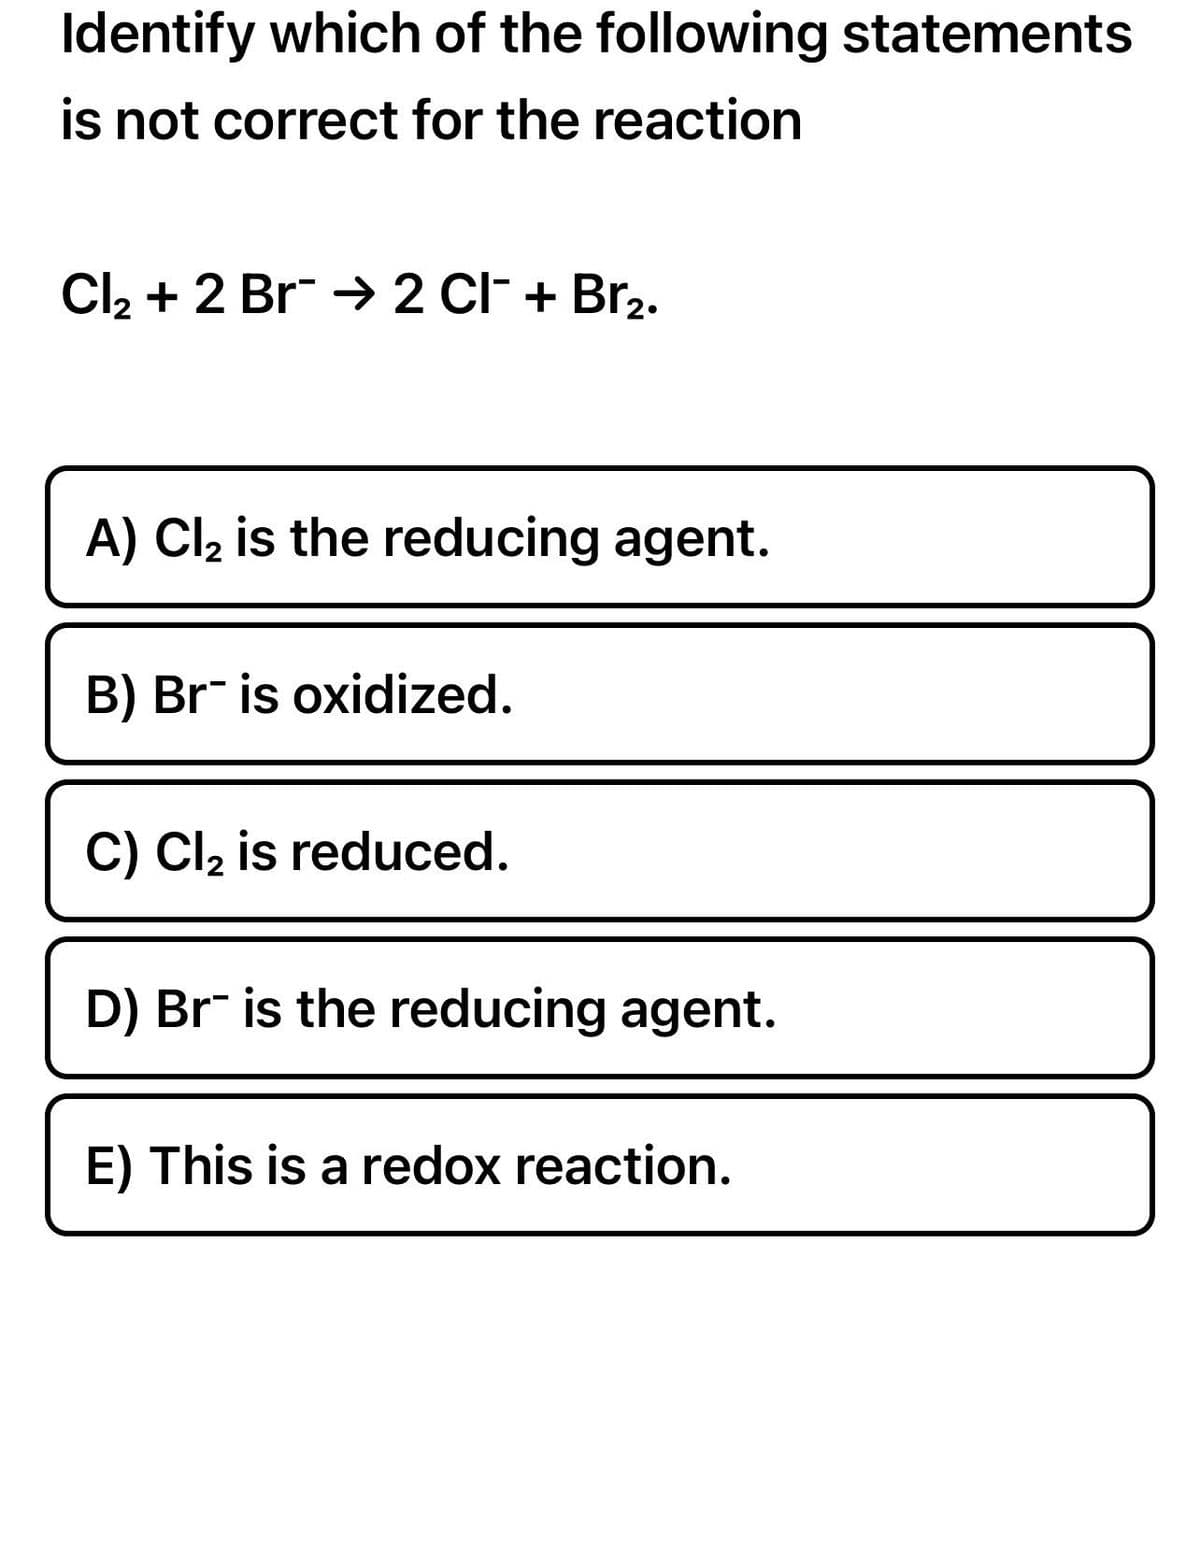 Identify which of the following statements
is not correct for the reaction
Cl₂ + 2 Br → 2 CI¯ + Br₂.
A) Cl₂ is the reducing agent.
B) Br is oxidized.
C) Cl₂ is reduced.
D) Br is the reducing agent.
E) This is a redox reaction.